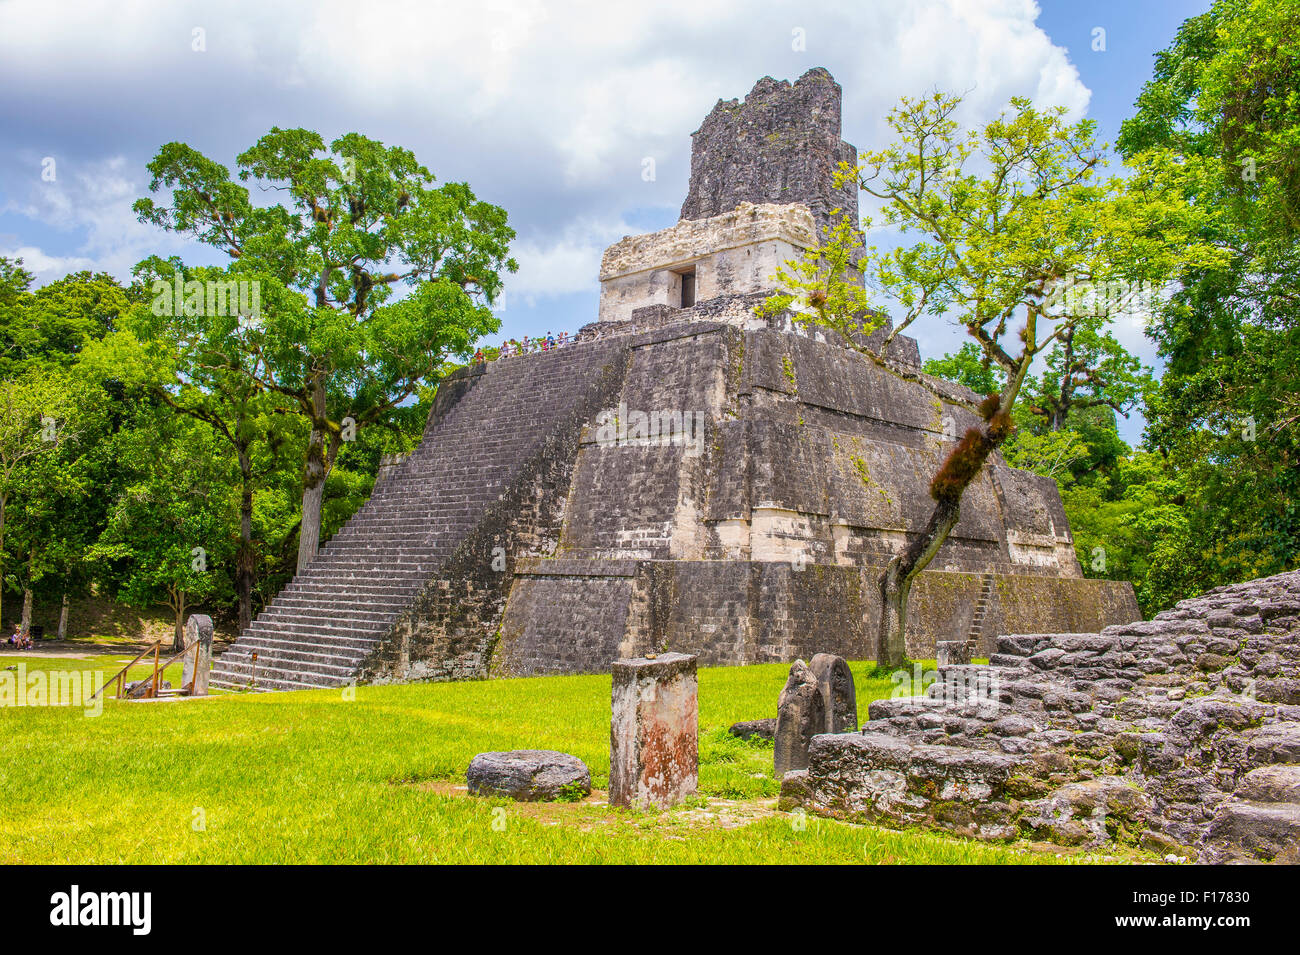 The archaeological site of the pre-Columbian Maya civilization in Tikal National Park , Guatemala Stock Photo